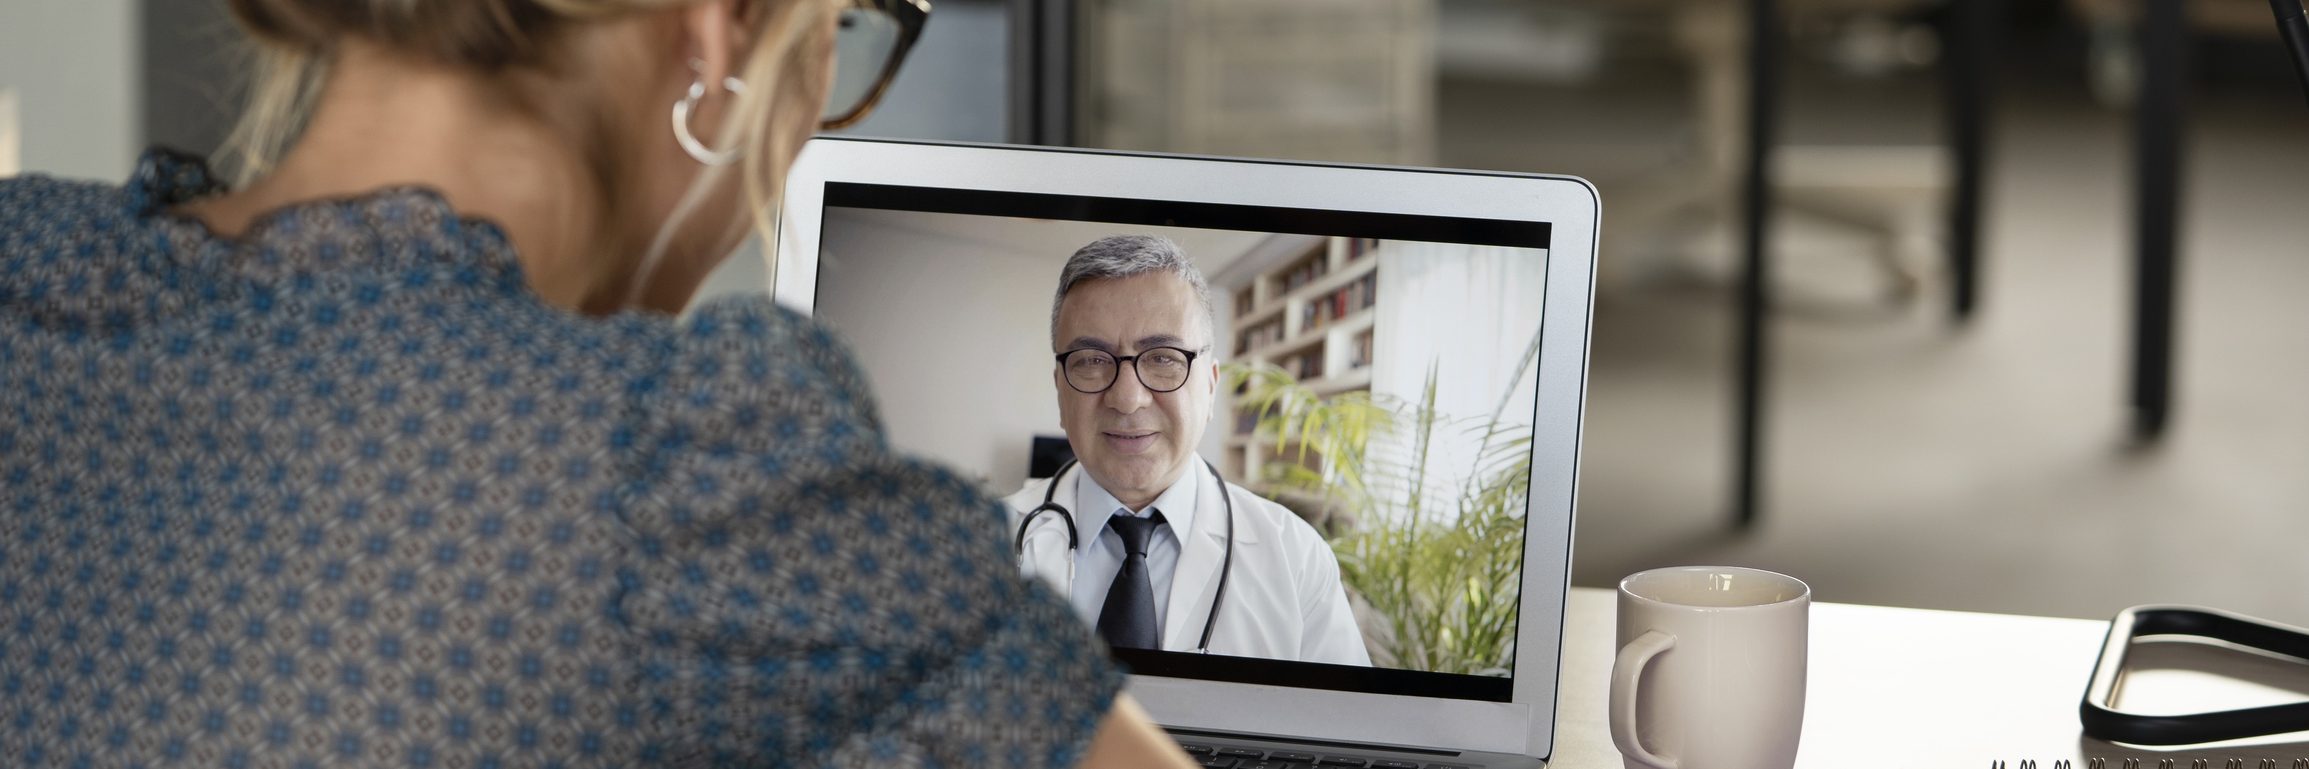 Views on PCP Telemedicine Consultations Vary